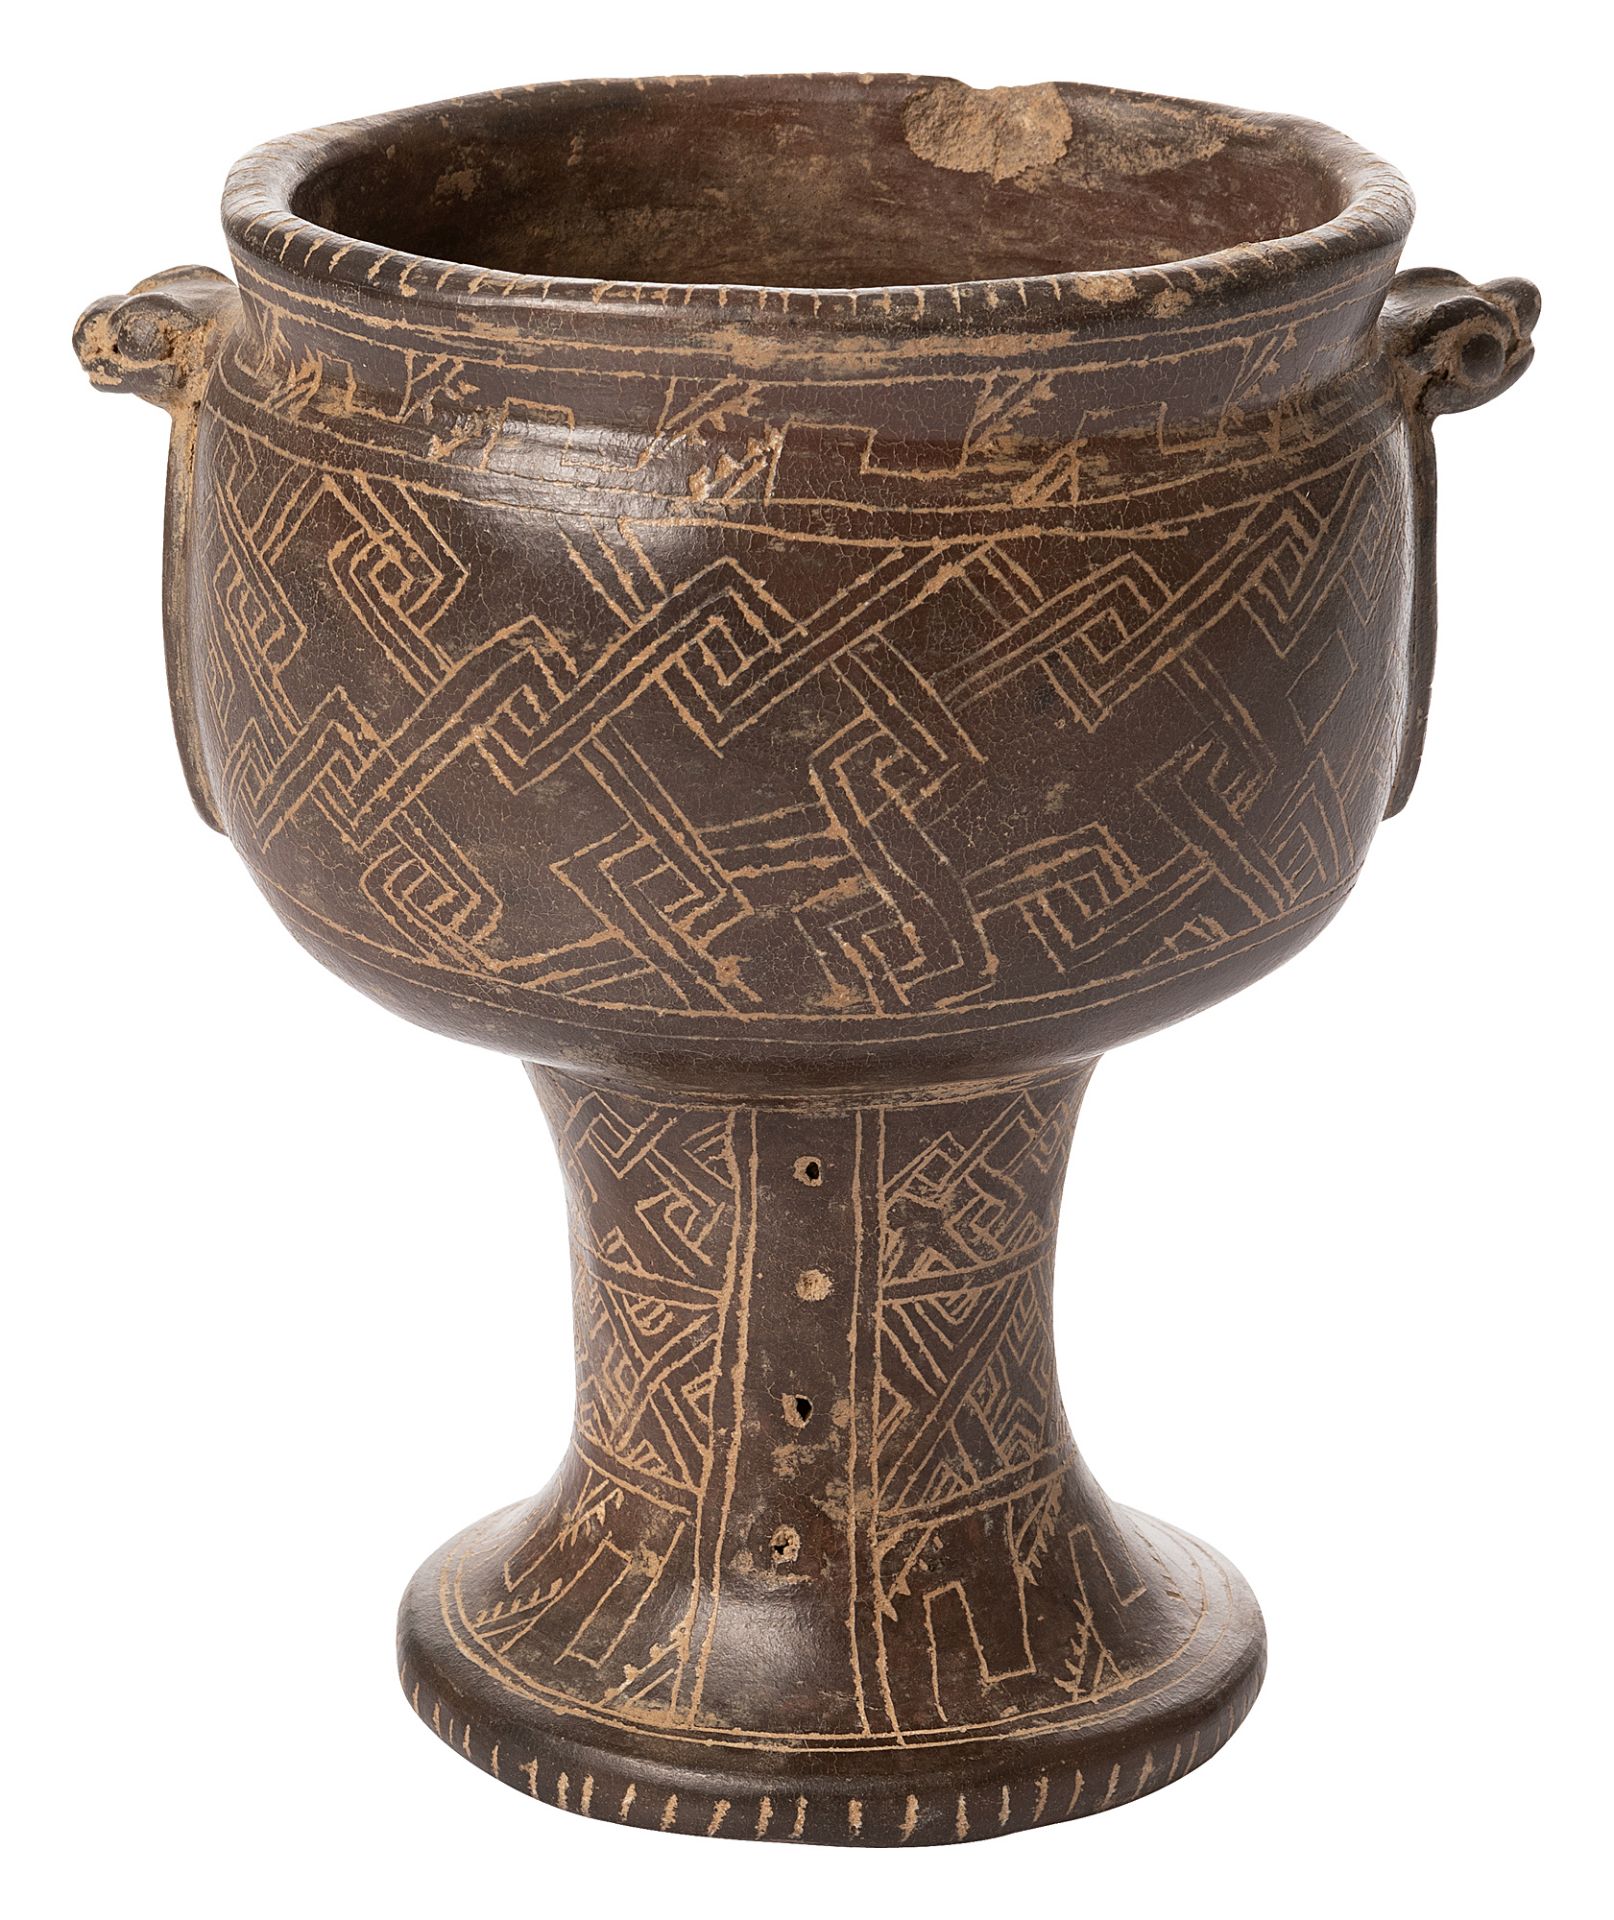 Goblet with animal face and snake heads - Image 2 of 2